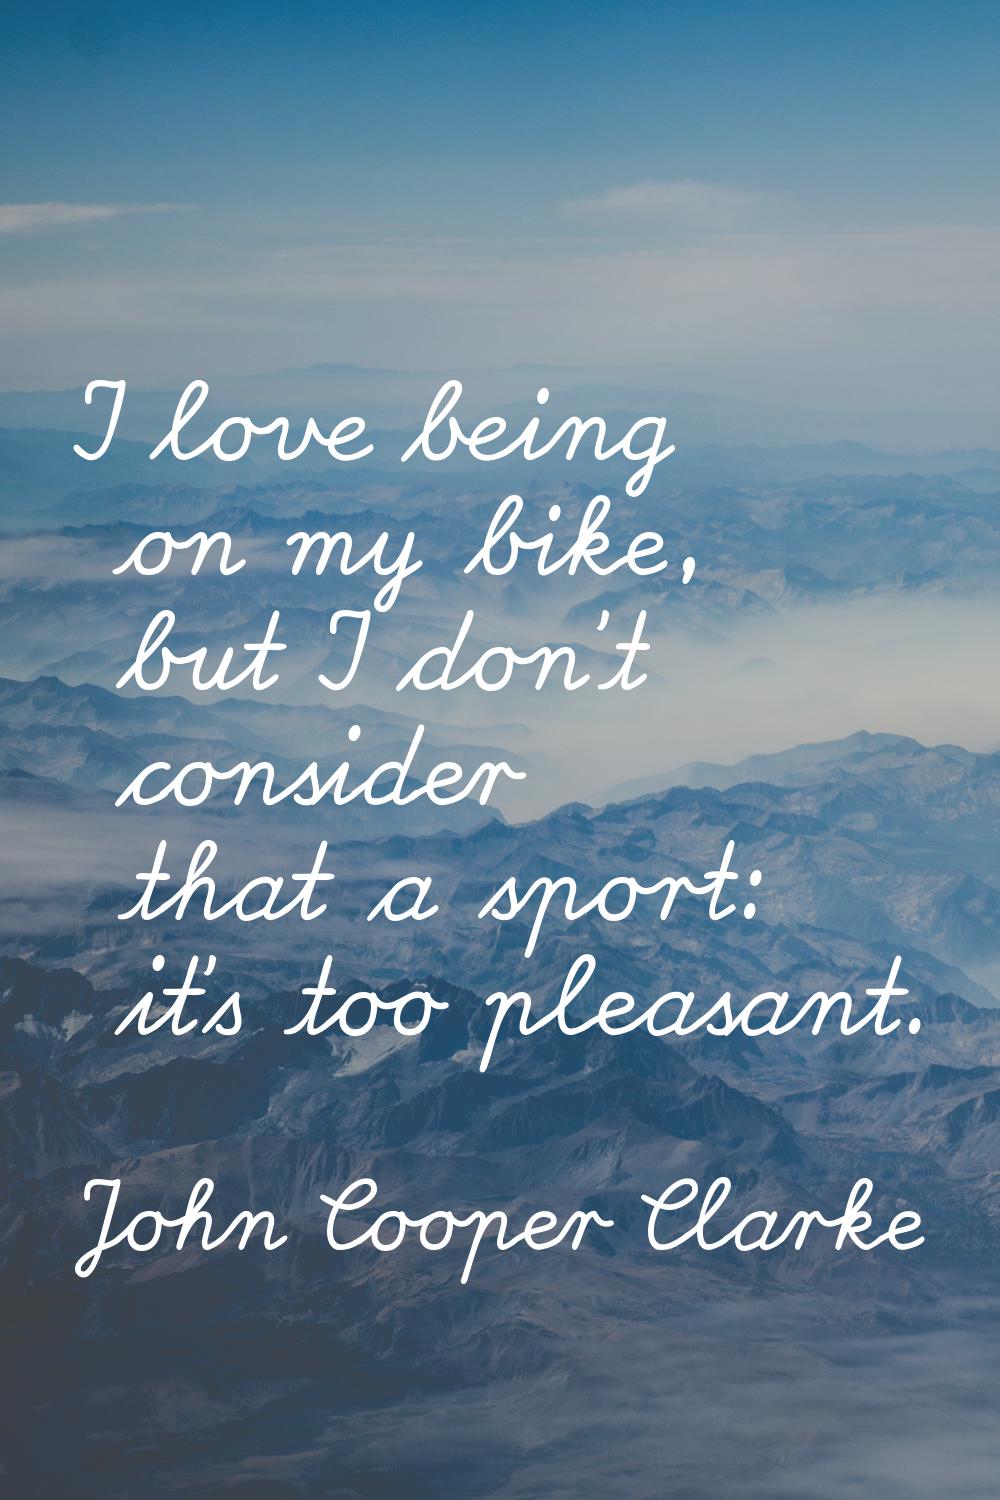 I love being on my bike, but I don't consider that a sport: it's too pleasant.